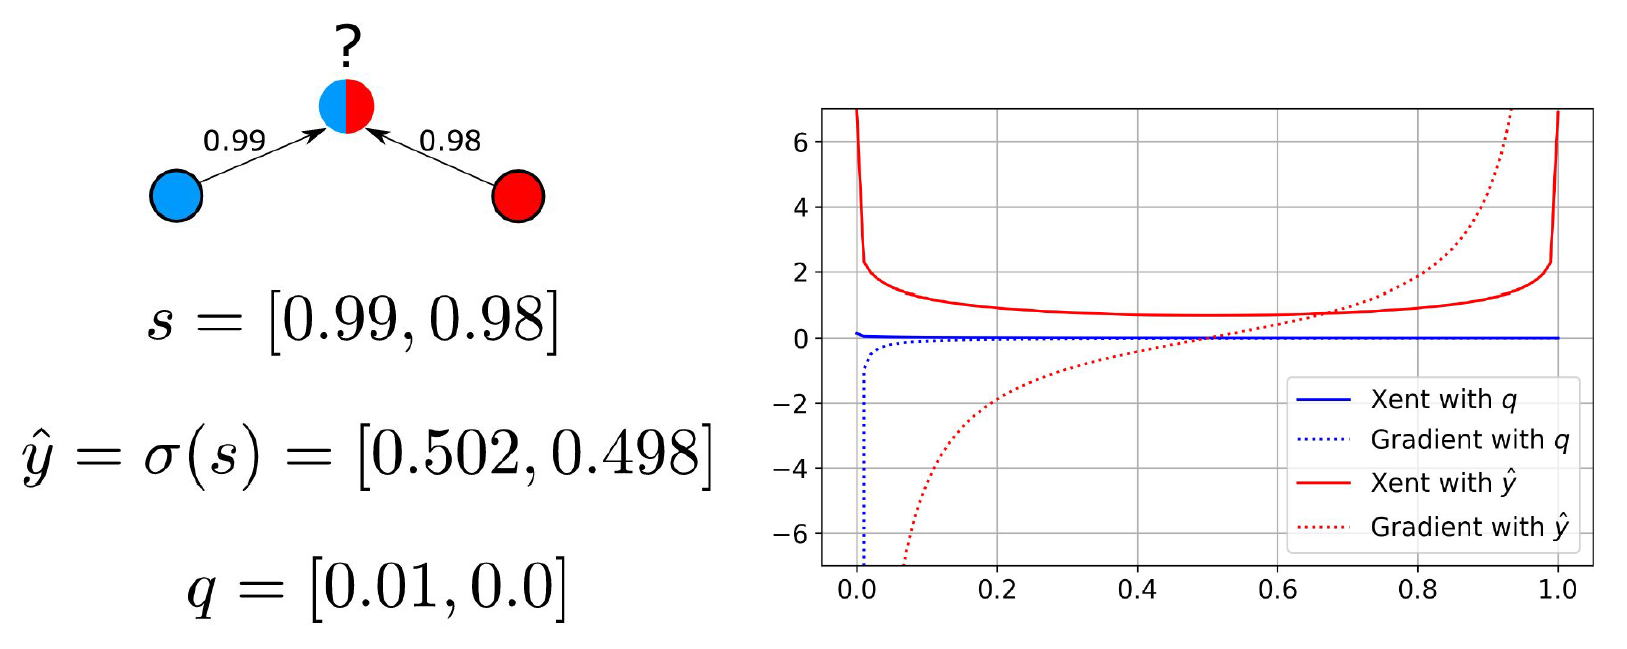 Image 6 is a formula (left) paired with a graph (right). The graph includes the red and blue classes represented mathematically as the vector and two labels. On the right is the graph of the cross-entropy classification loss and its gradient. The red line represents the softmax. The blue line represents the credibility. While the blue line flows in one straight right from left to right, the red line forms the shape of a U on the topmost portion of the graph above 0. 